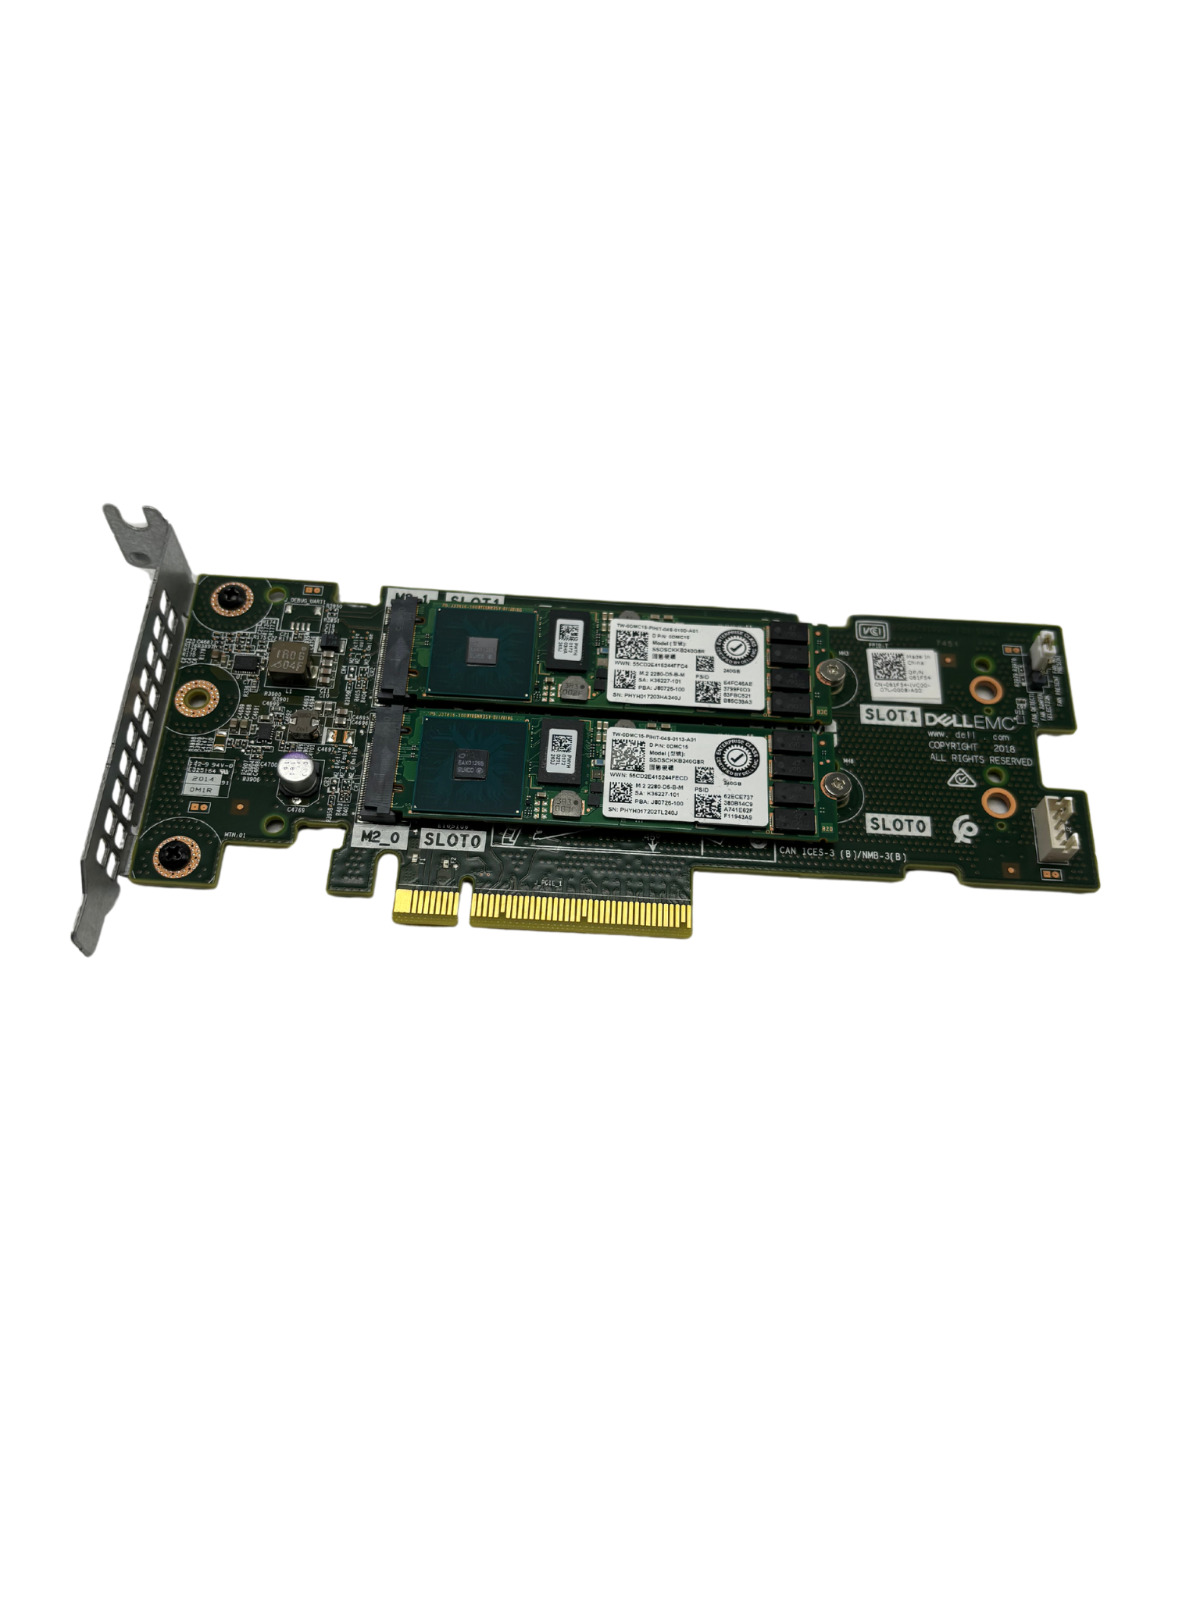 Dell 61F54 PowerEdge Boss Dual M.2 PCIe Adapter Controller Card w/ 2x240GB SSD